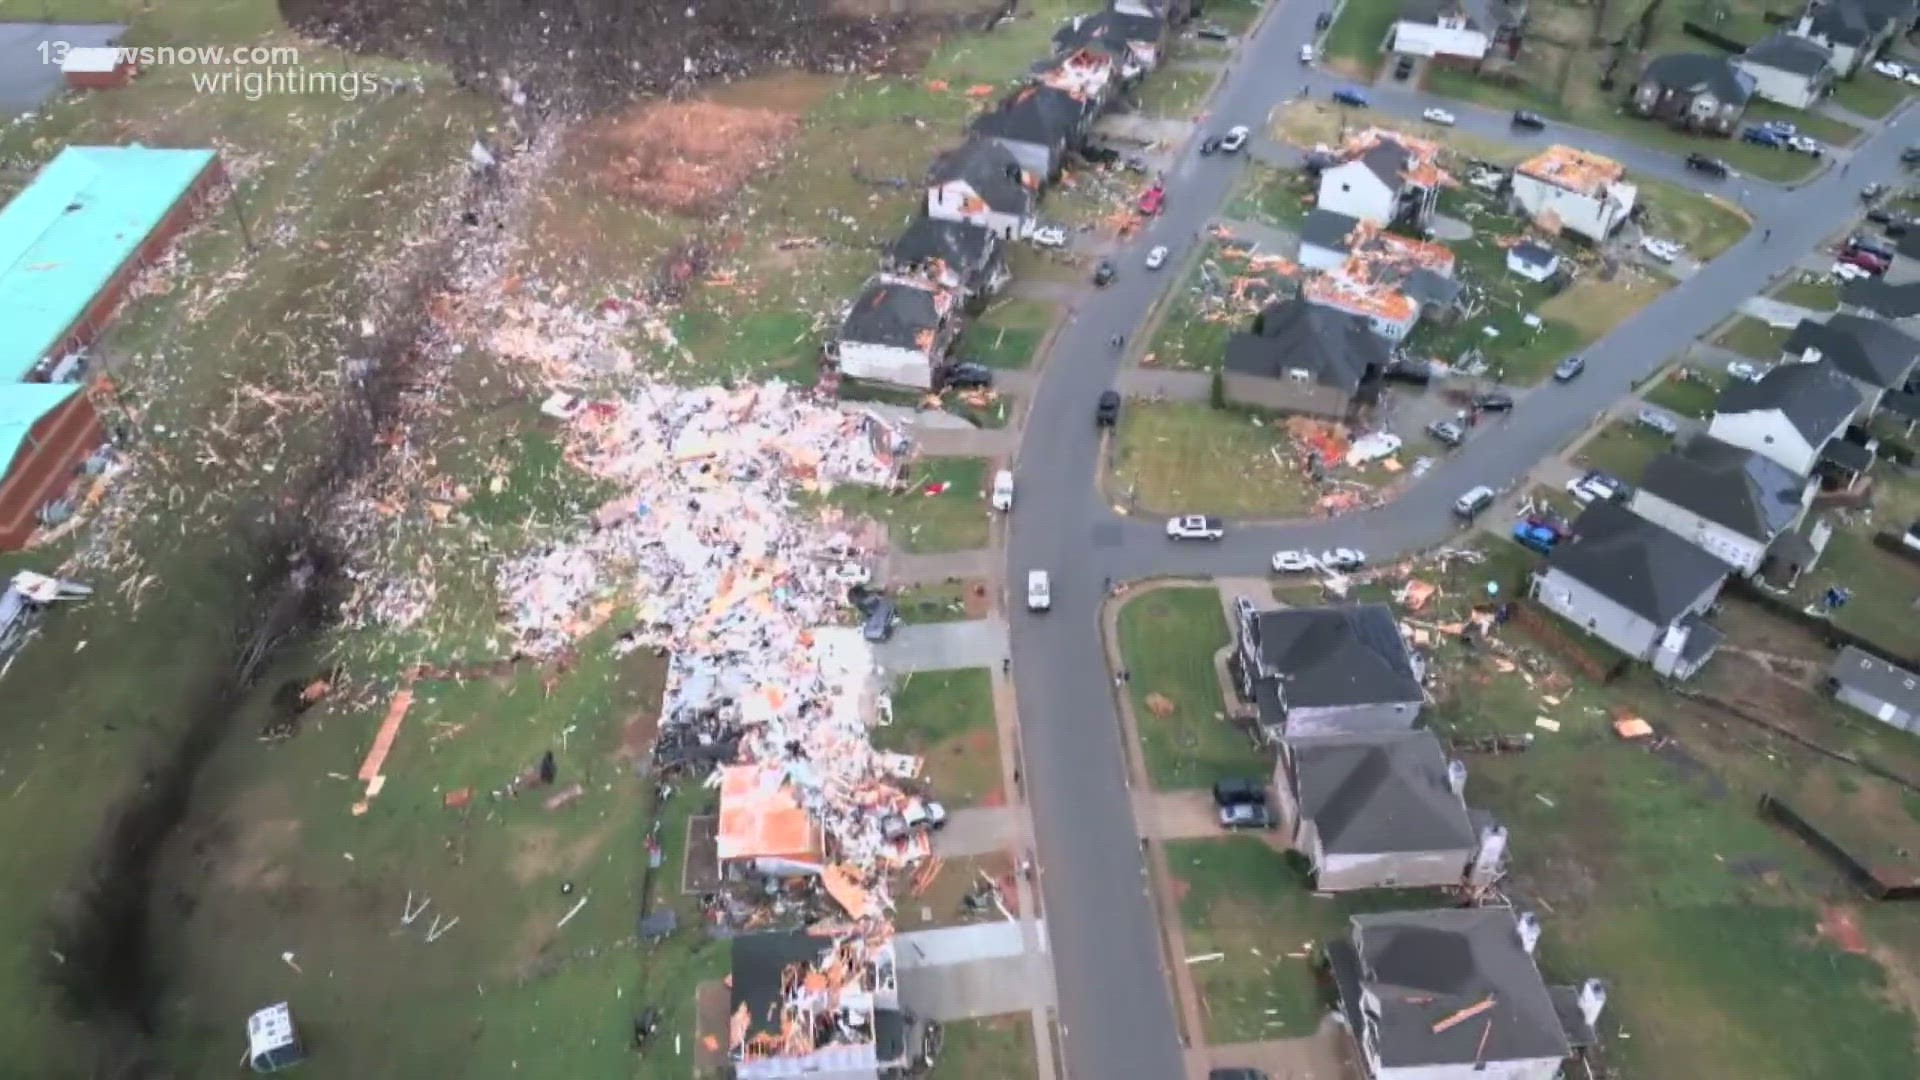 The powerful storm system that spawned deadly tornadoes across the south is hitting the northeast. In Tennessee, at least 6 people are dead, including 2 children.